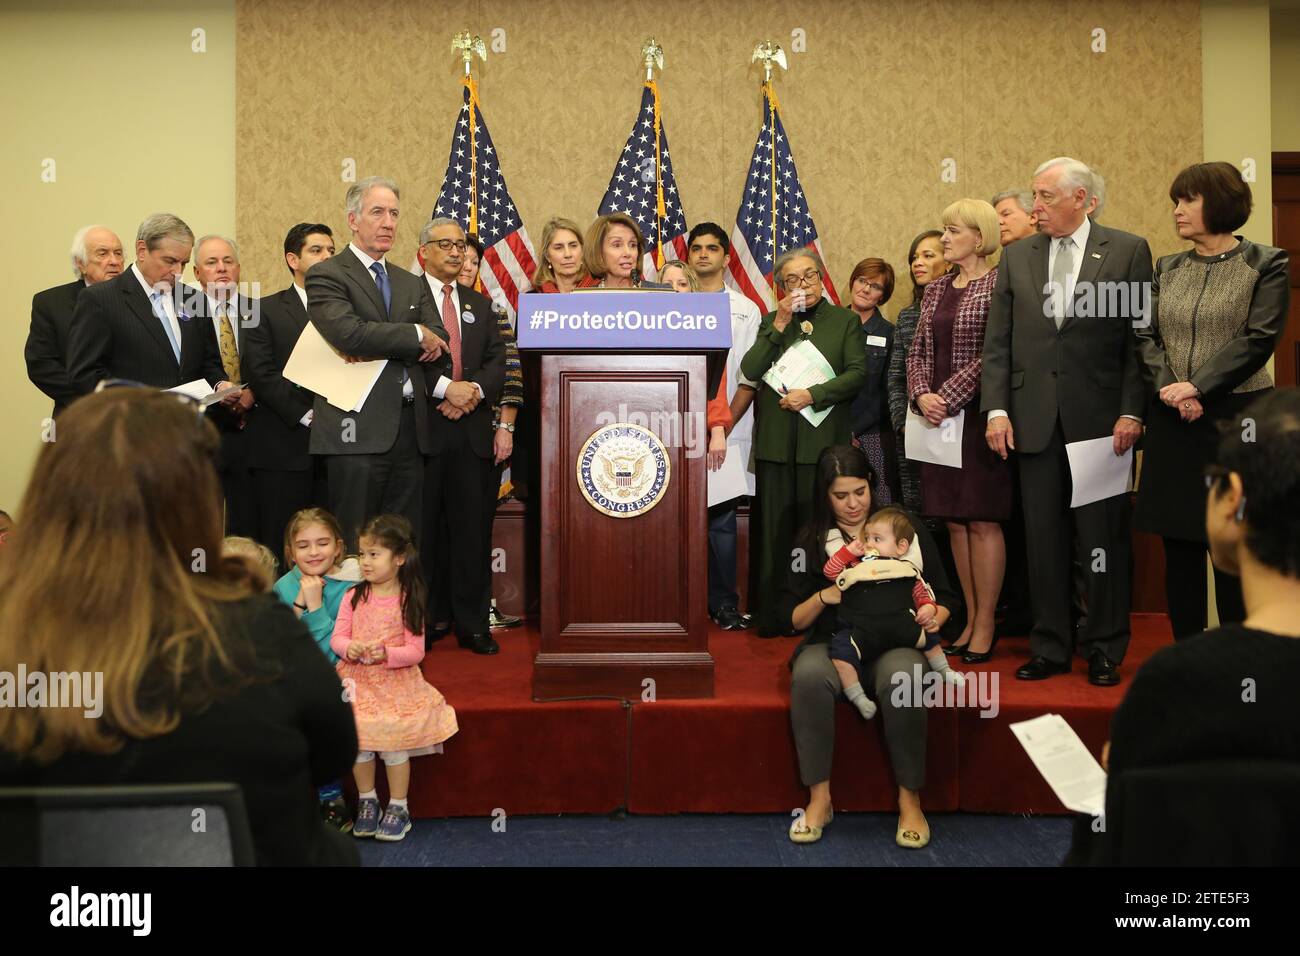 House Minority Leader Nancy Pelosi of Calif., and House Democrats hold a news conference with school nurses, parents and advocates to highlight "how Republican plans to dismantle the Affordable Care Act (ACA) will harm children." on Capitol Hill in Washington, Tuesday, Feb. 7, 2017. (Photo by Oliver Contreras) *** Please Use Credit from Credit Field *** Stock Photo